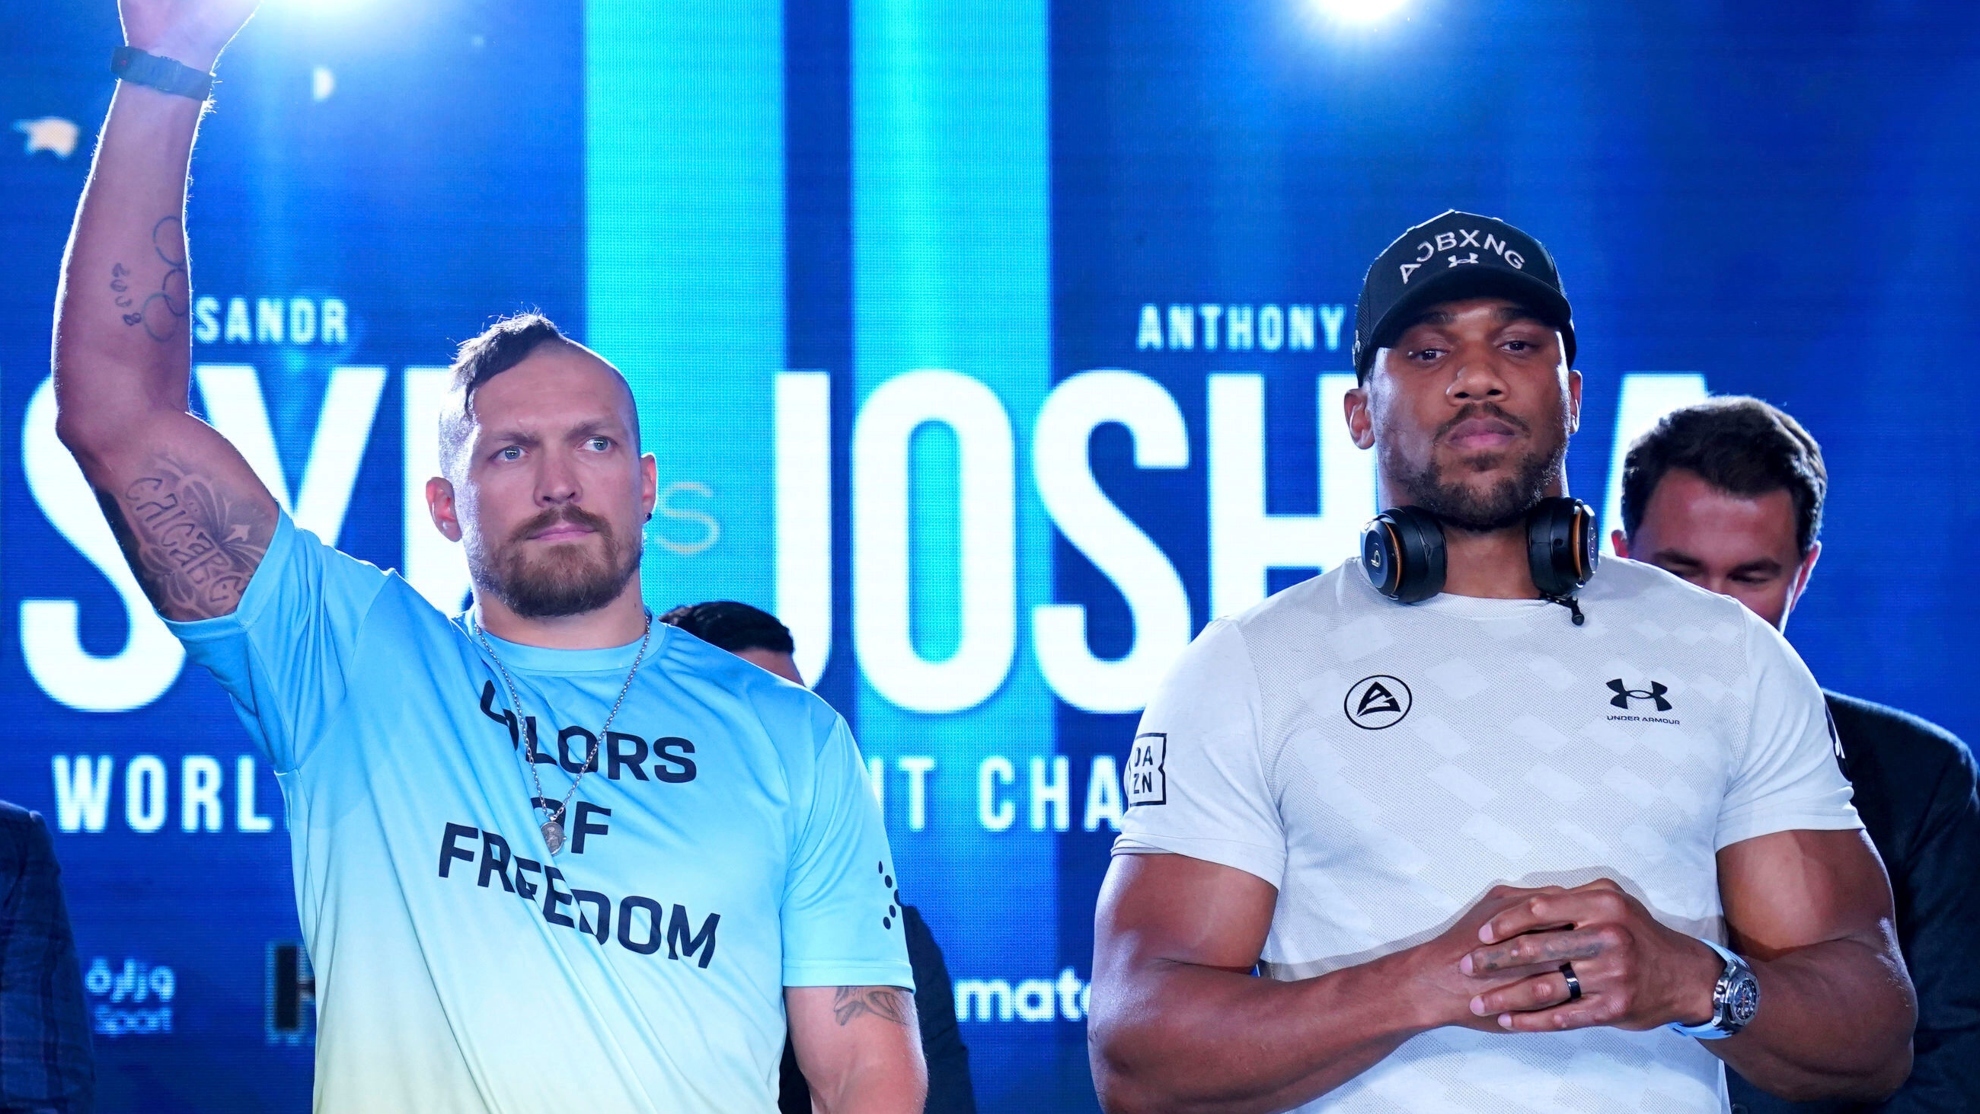 Boxers Oleksandr Usyk, left, and Anthony Joshua pose during a press conference